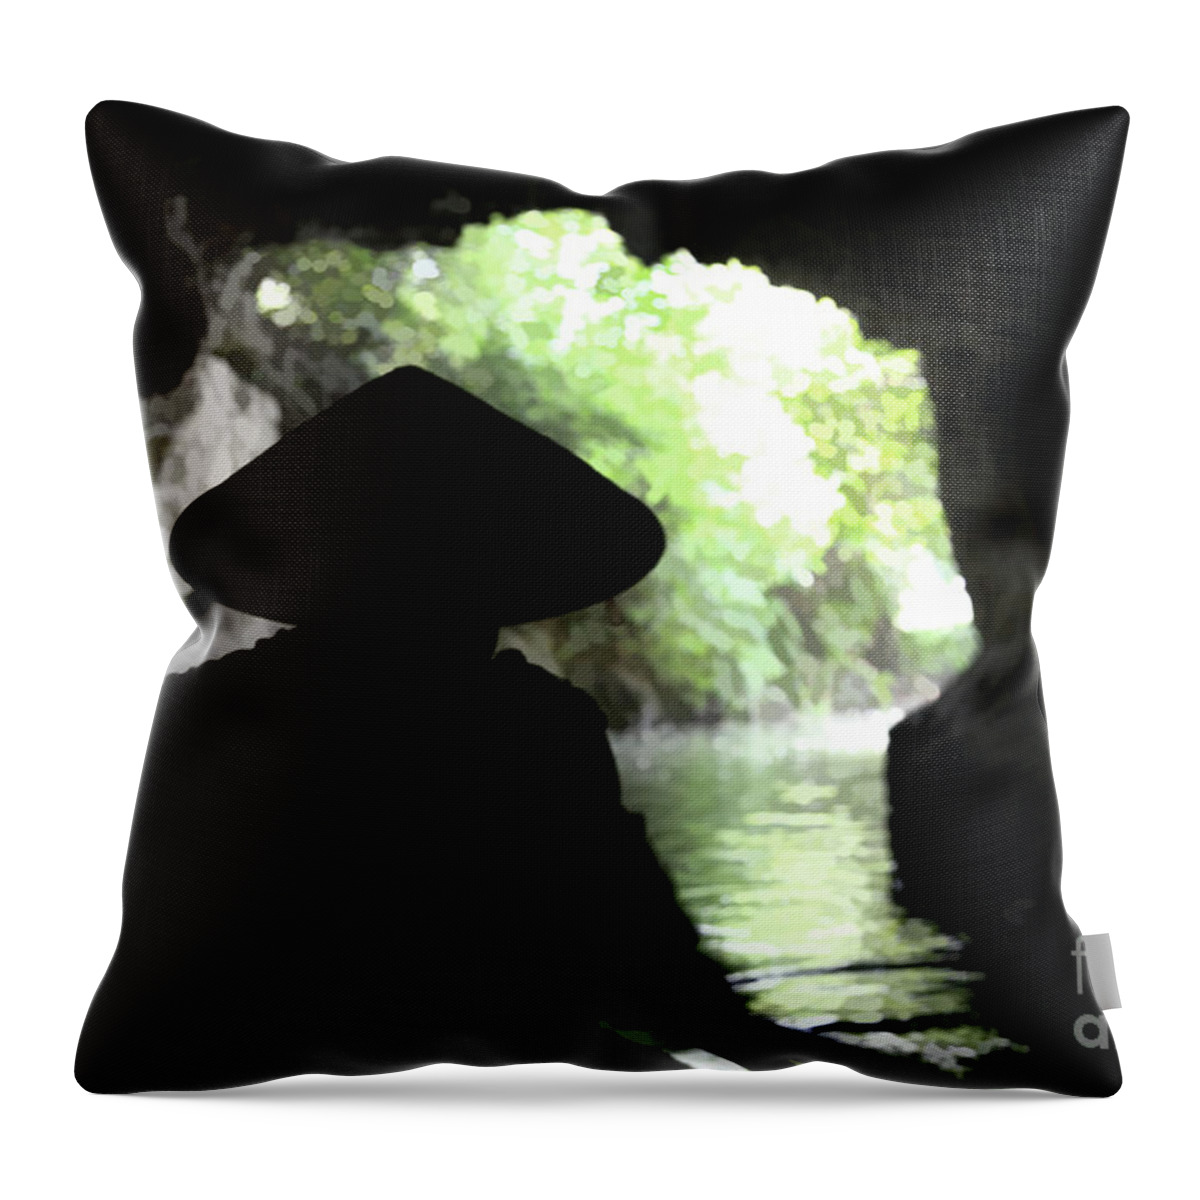  Vietnam Throw Pillow featuring the photograph Cave Exit Vietnam by Chuck Kuhn